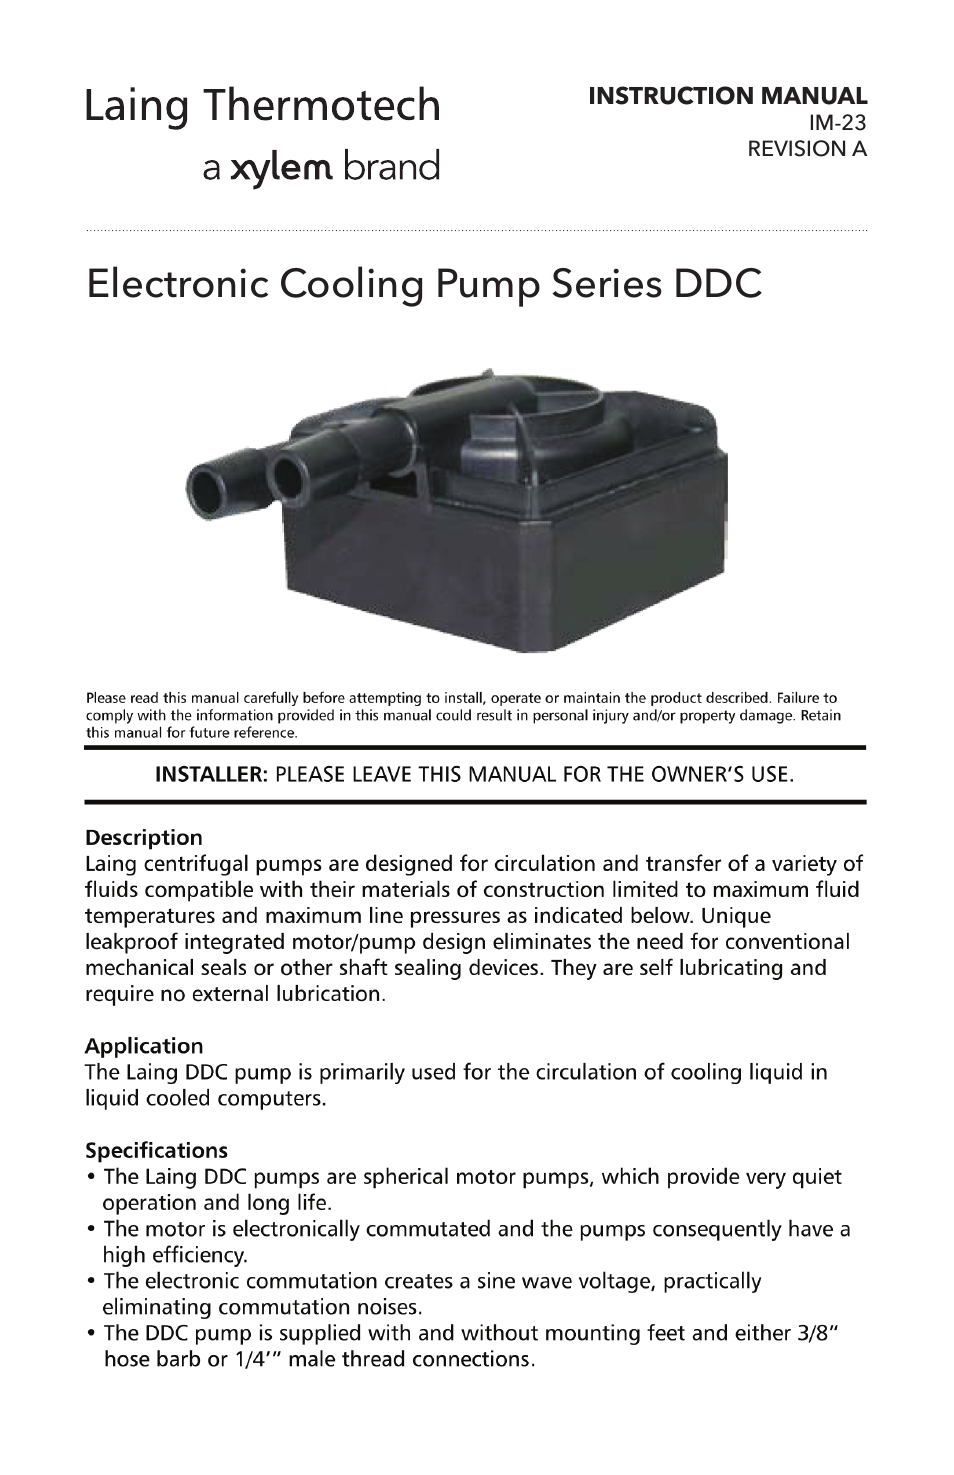 IM 23A Electronic Cooling Pump Series DDC